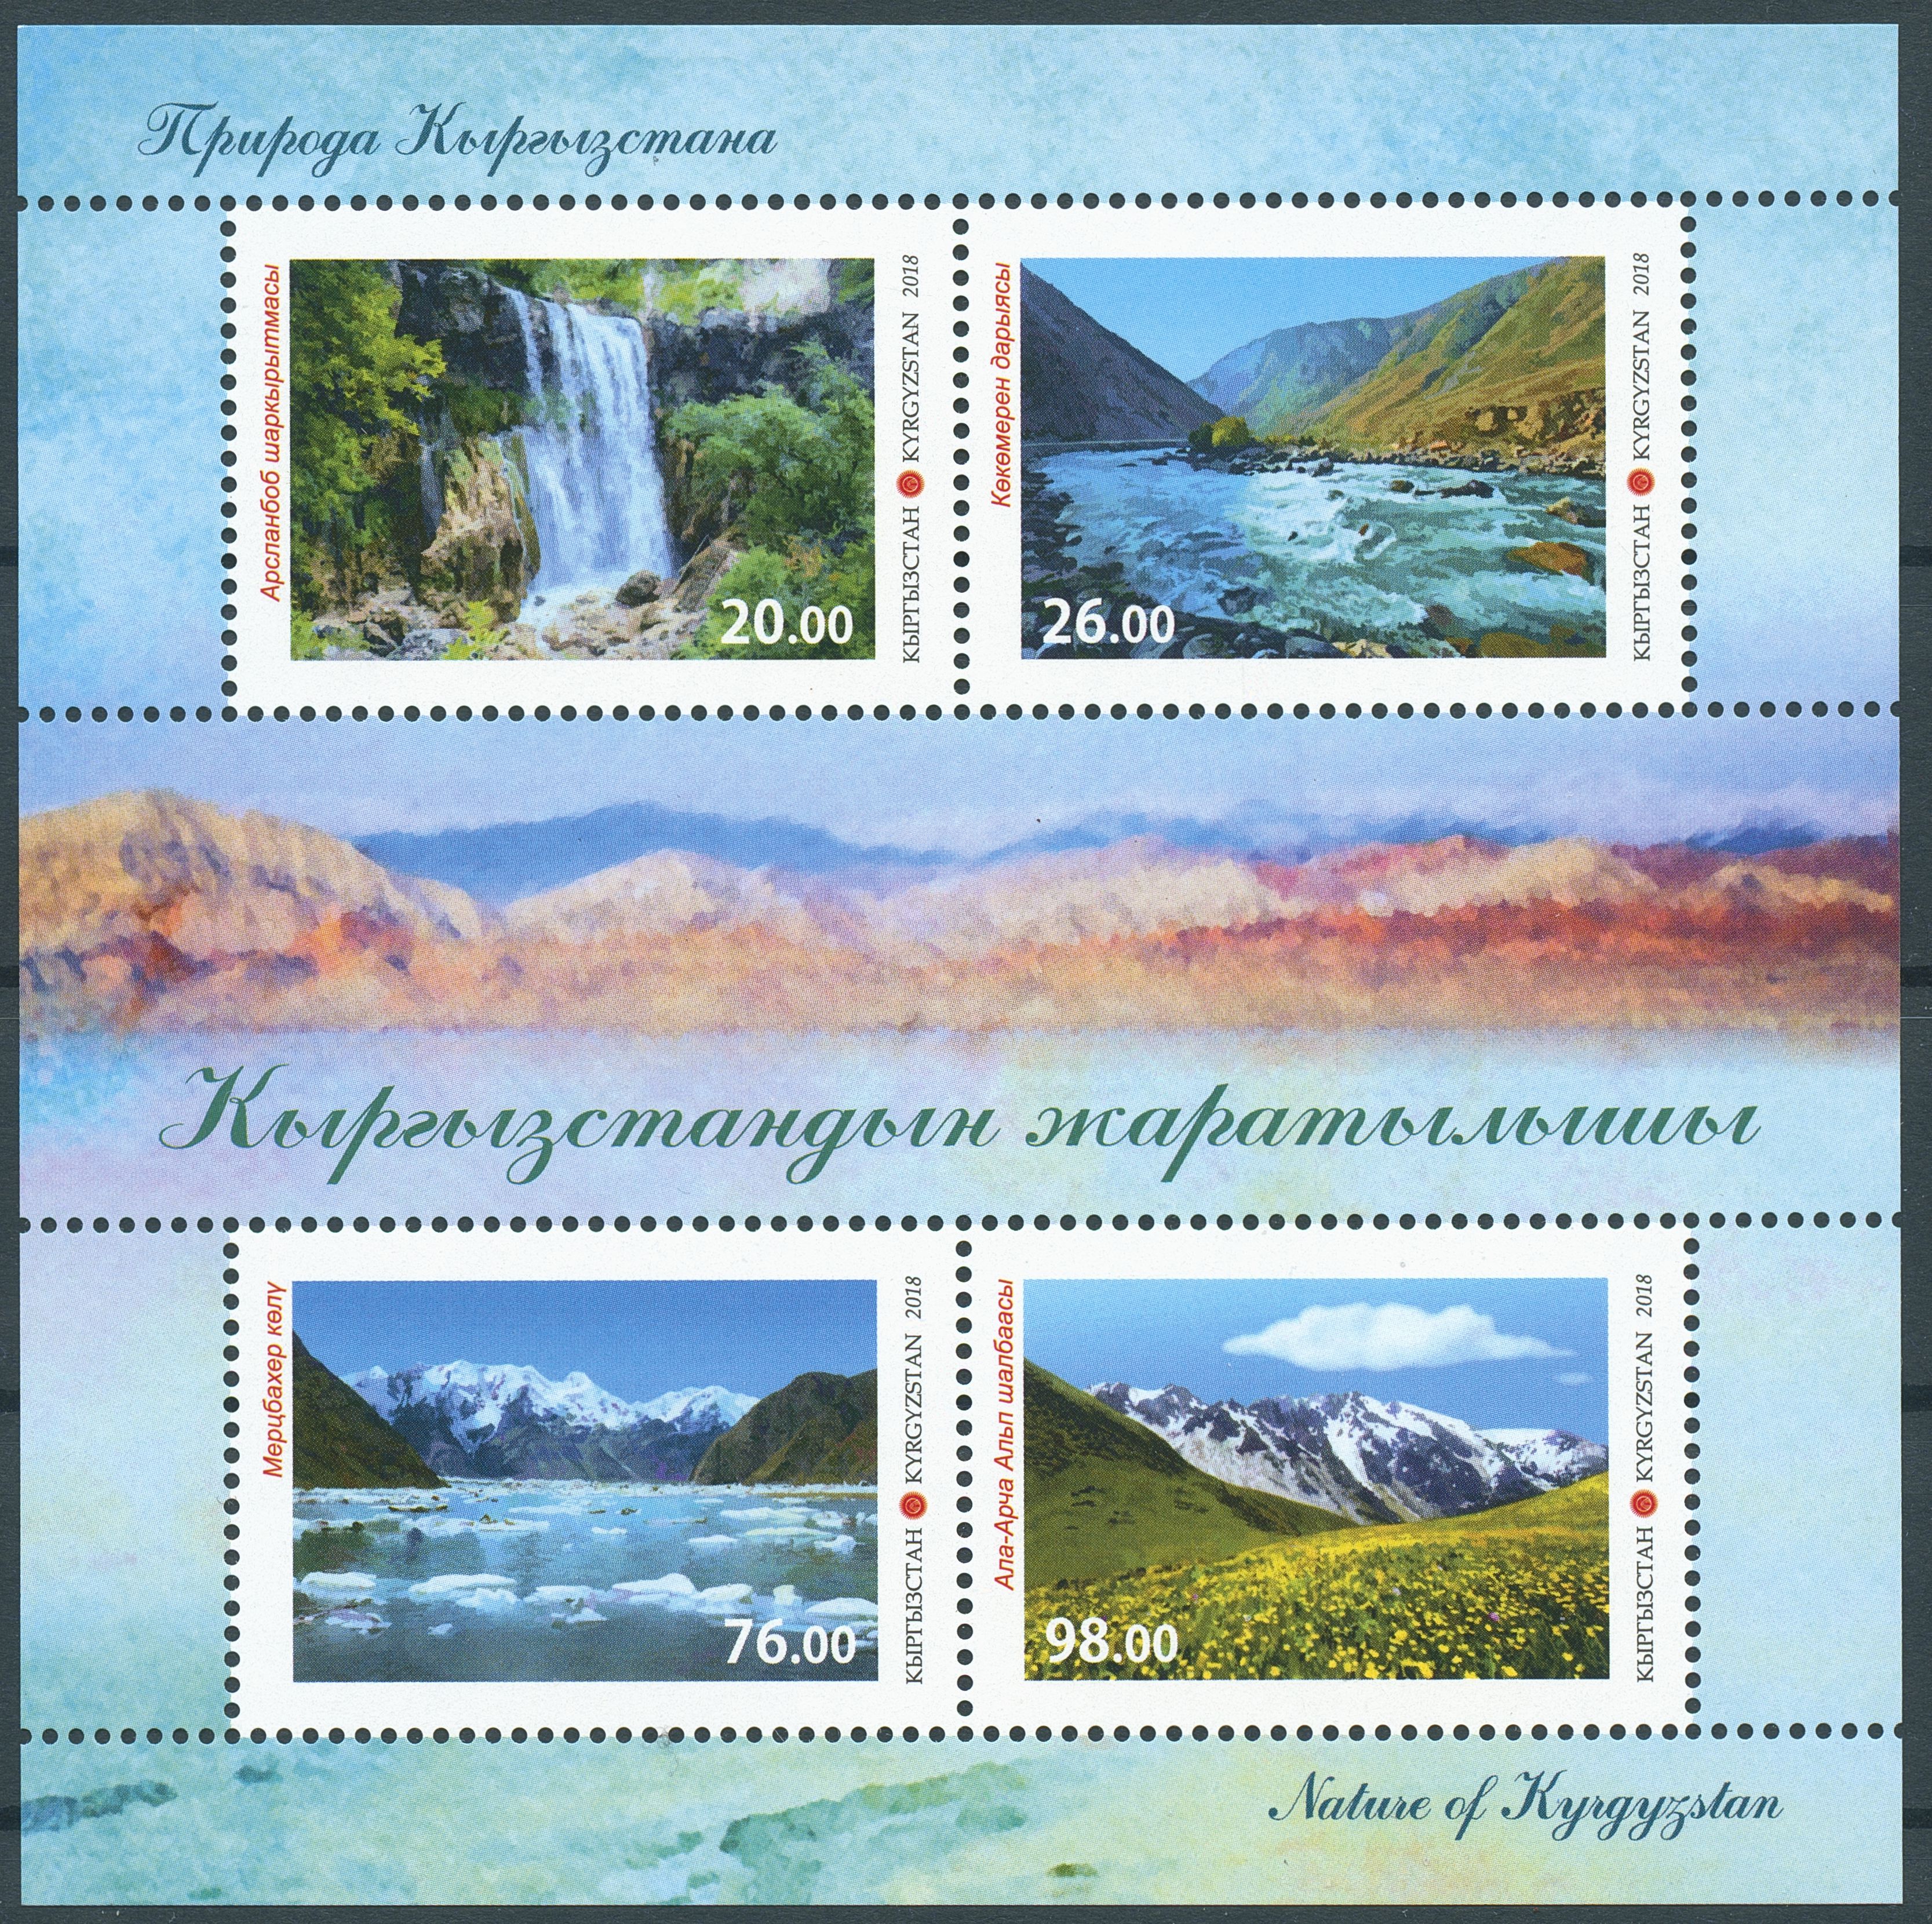 Kyrgyzstan 2018 MNH Landscapes 4v M/S Tourism Waterfalls Mountains Nature Stamps